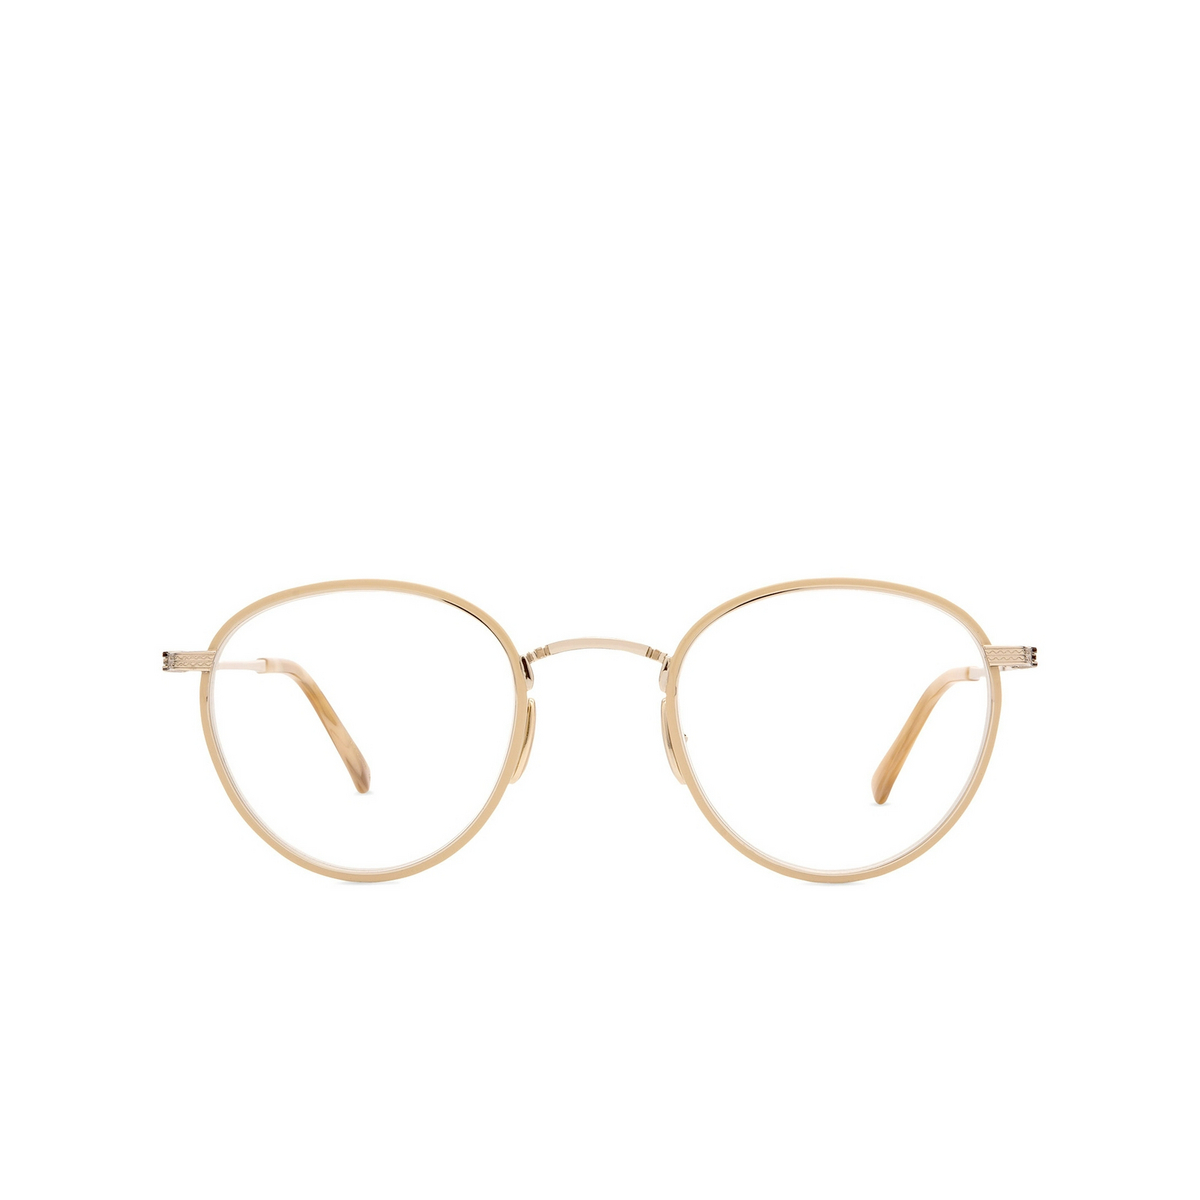 Mr. Leight CARLYLE C Eyeglasses IV-12KG Ivory-12K White Gold - front view